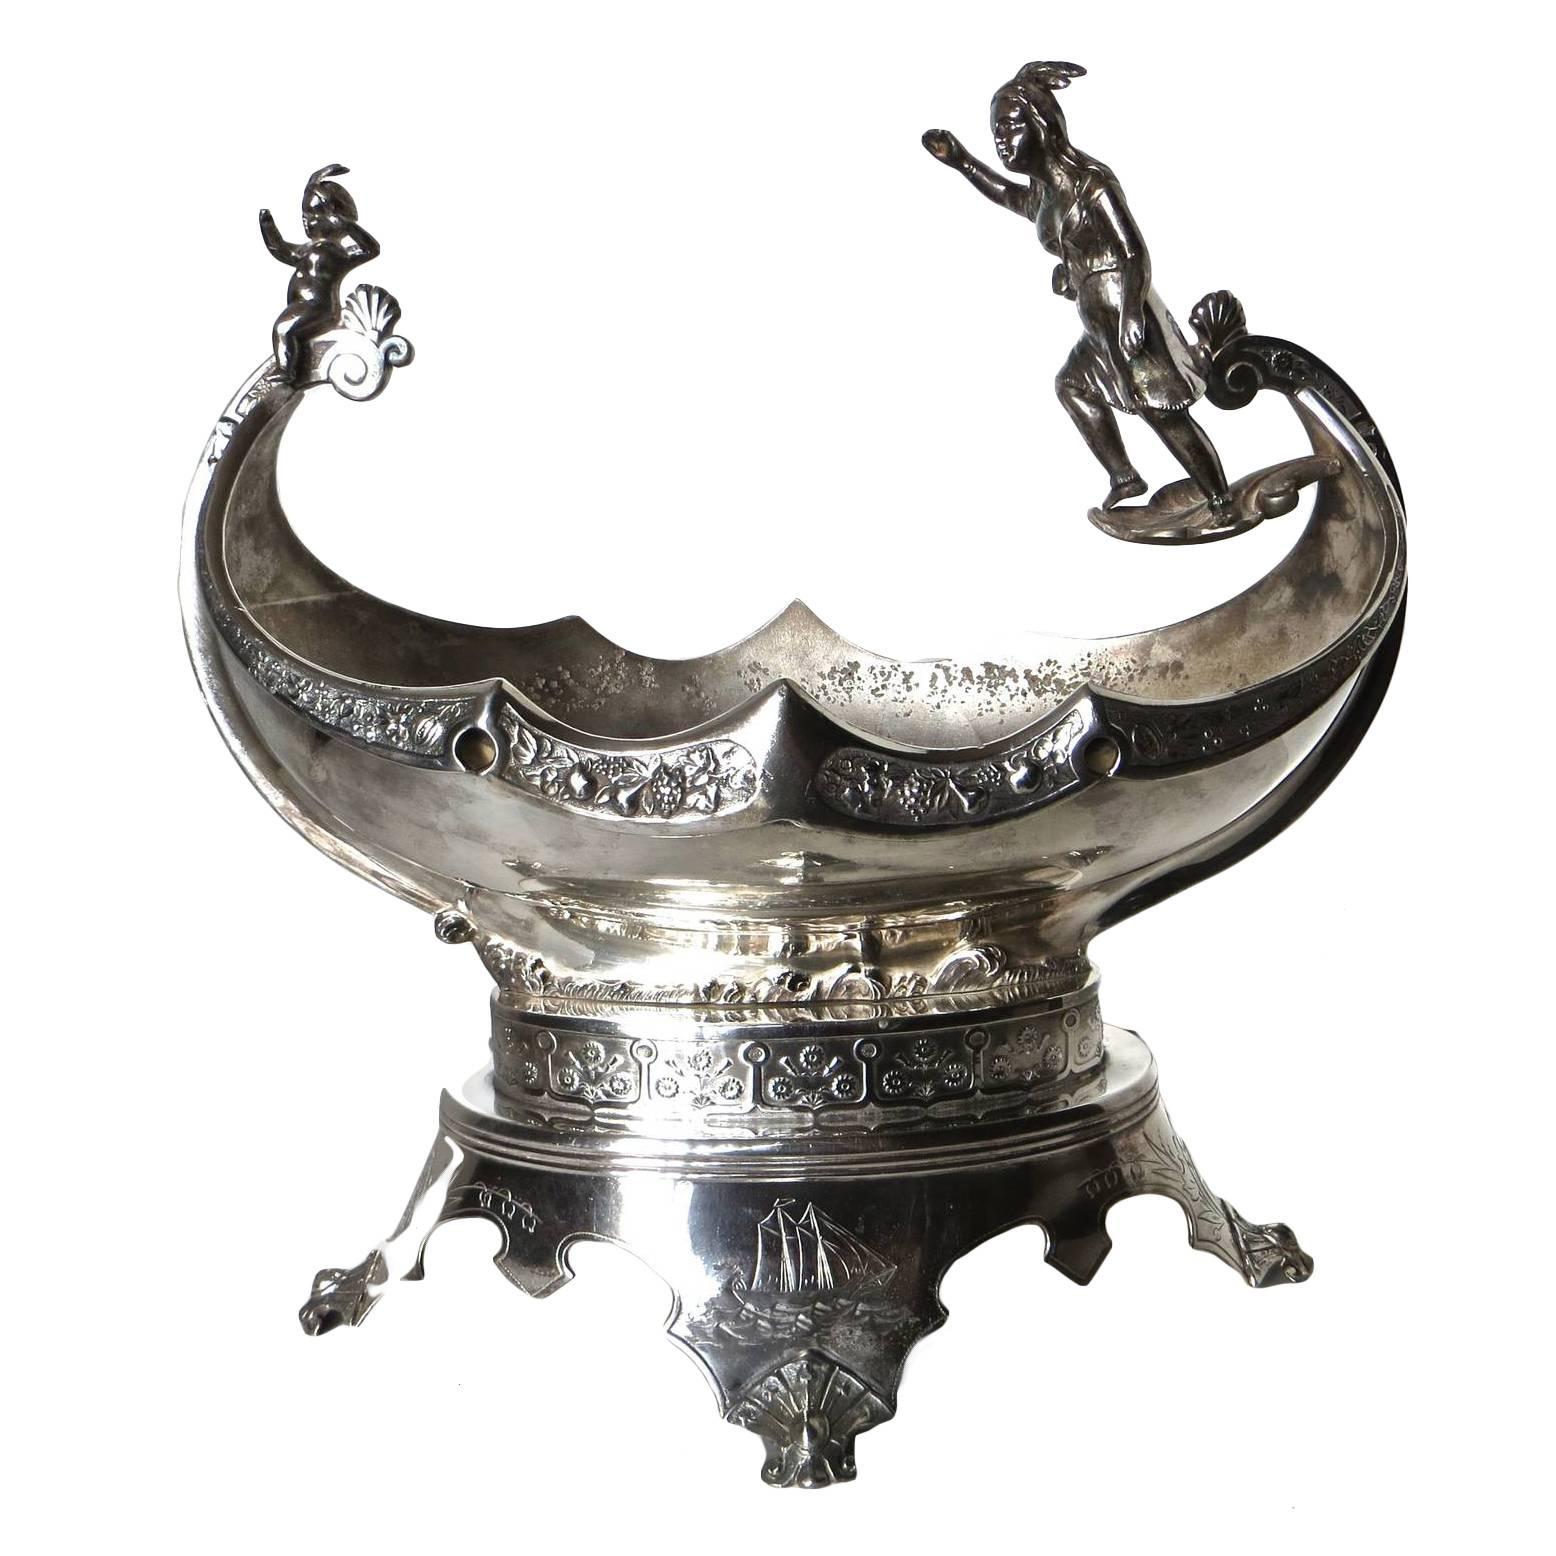 Indian Figural Silver Plated Fruit Bowl, circa 1880s